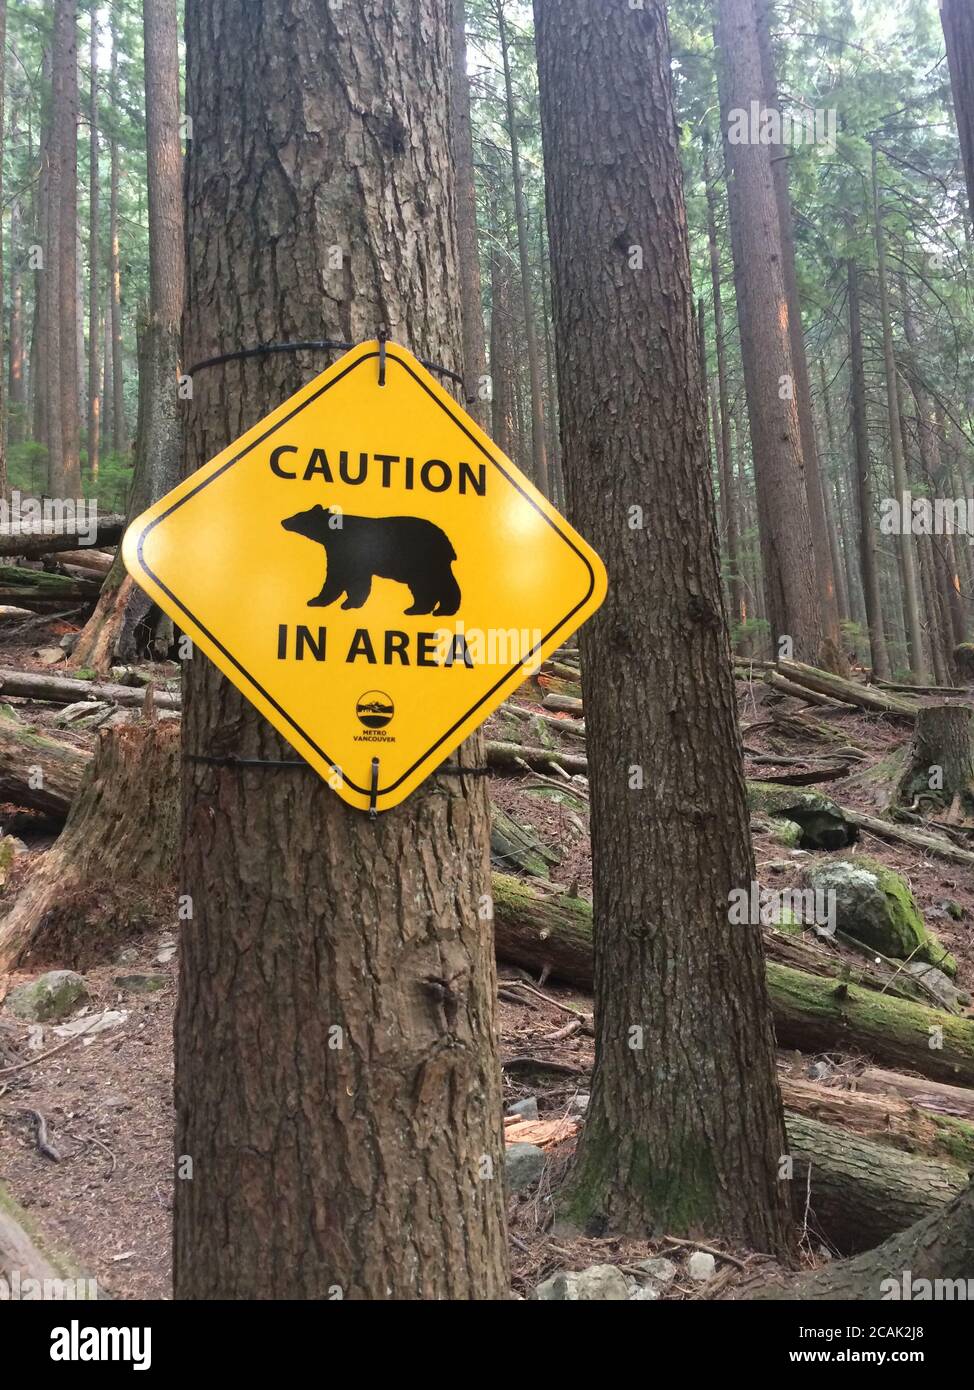 Bears in area sign at Grouse mountain hiking trail. North Vancouver, British Columbia / Canada. Stock Photo